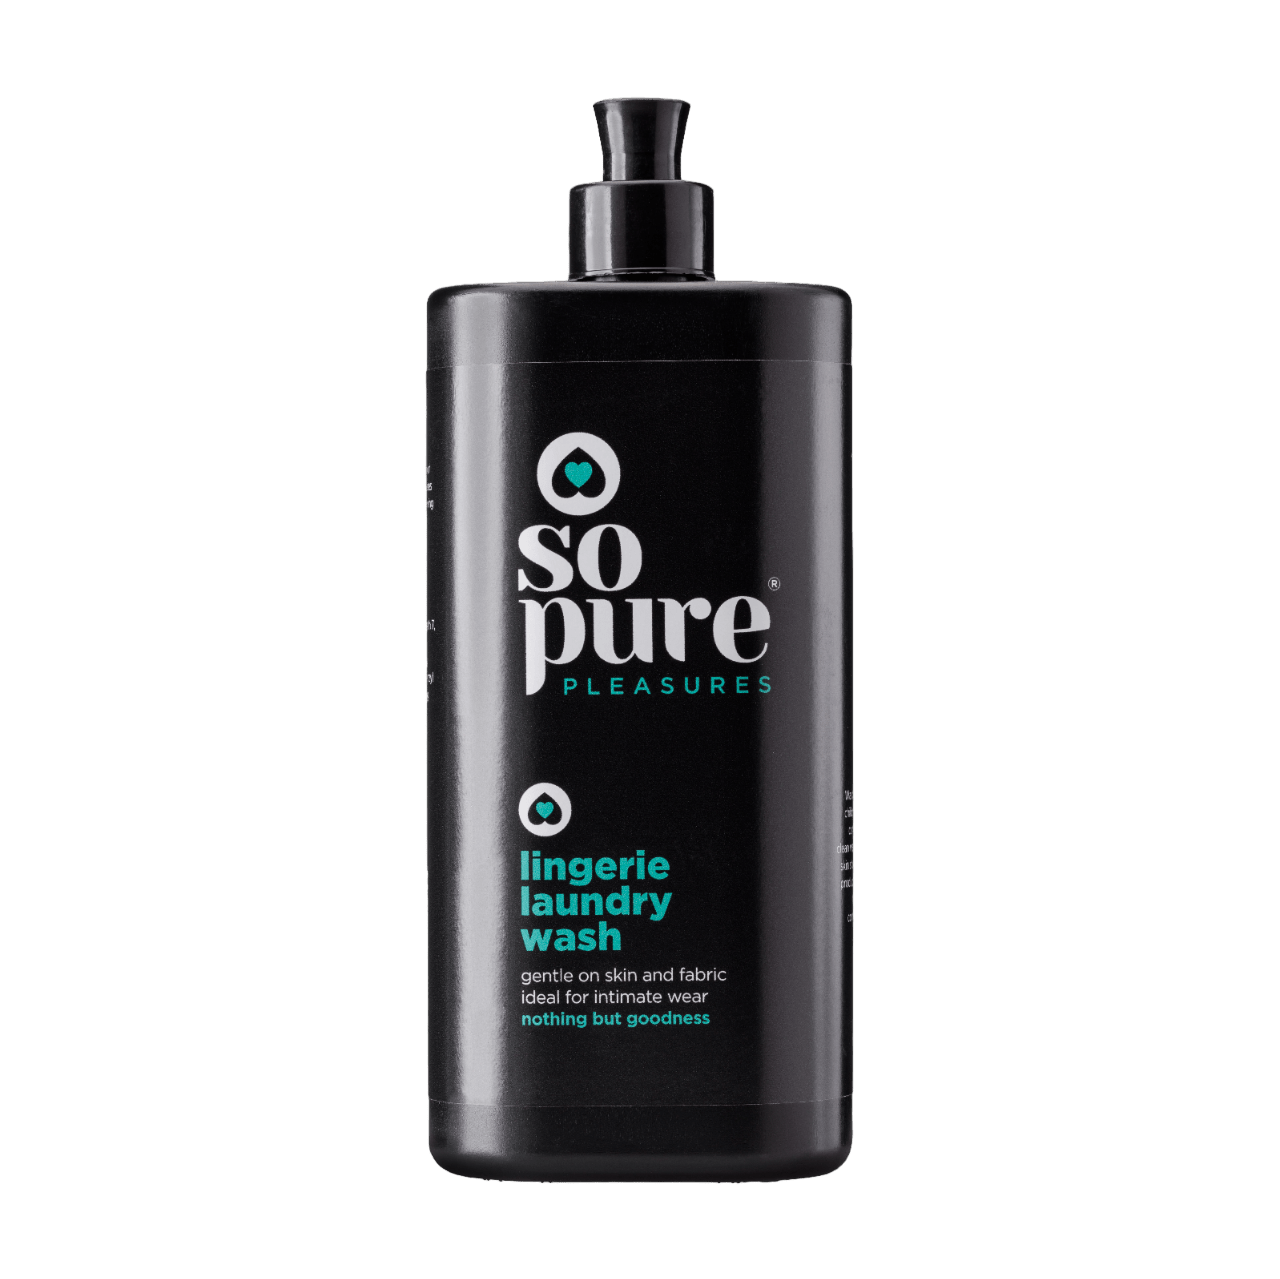 SoPure Lingerie Laundry Wash - SoPure Naturally